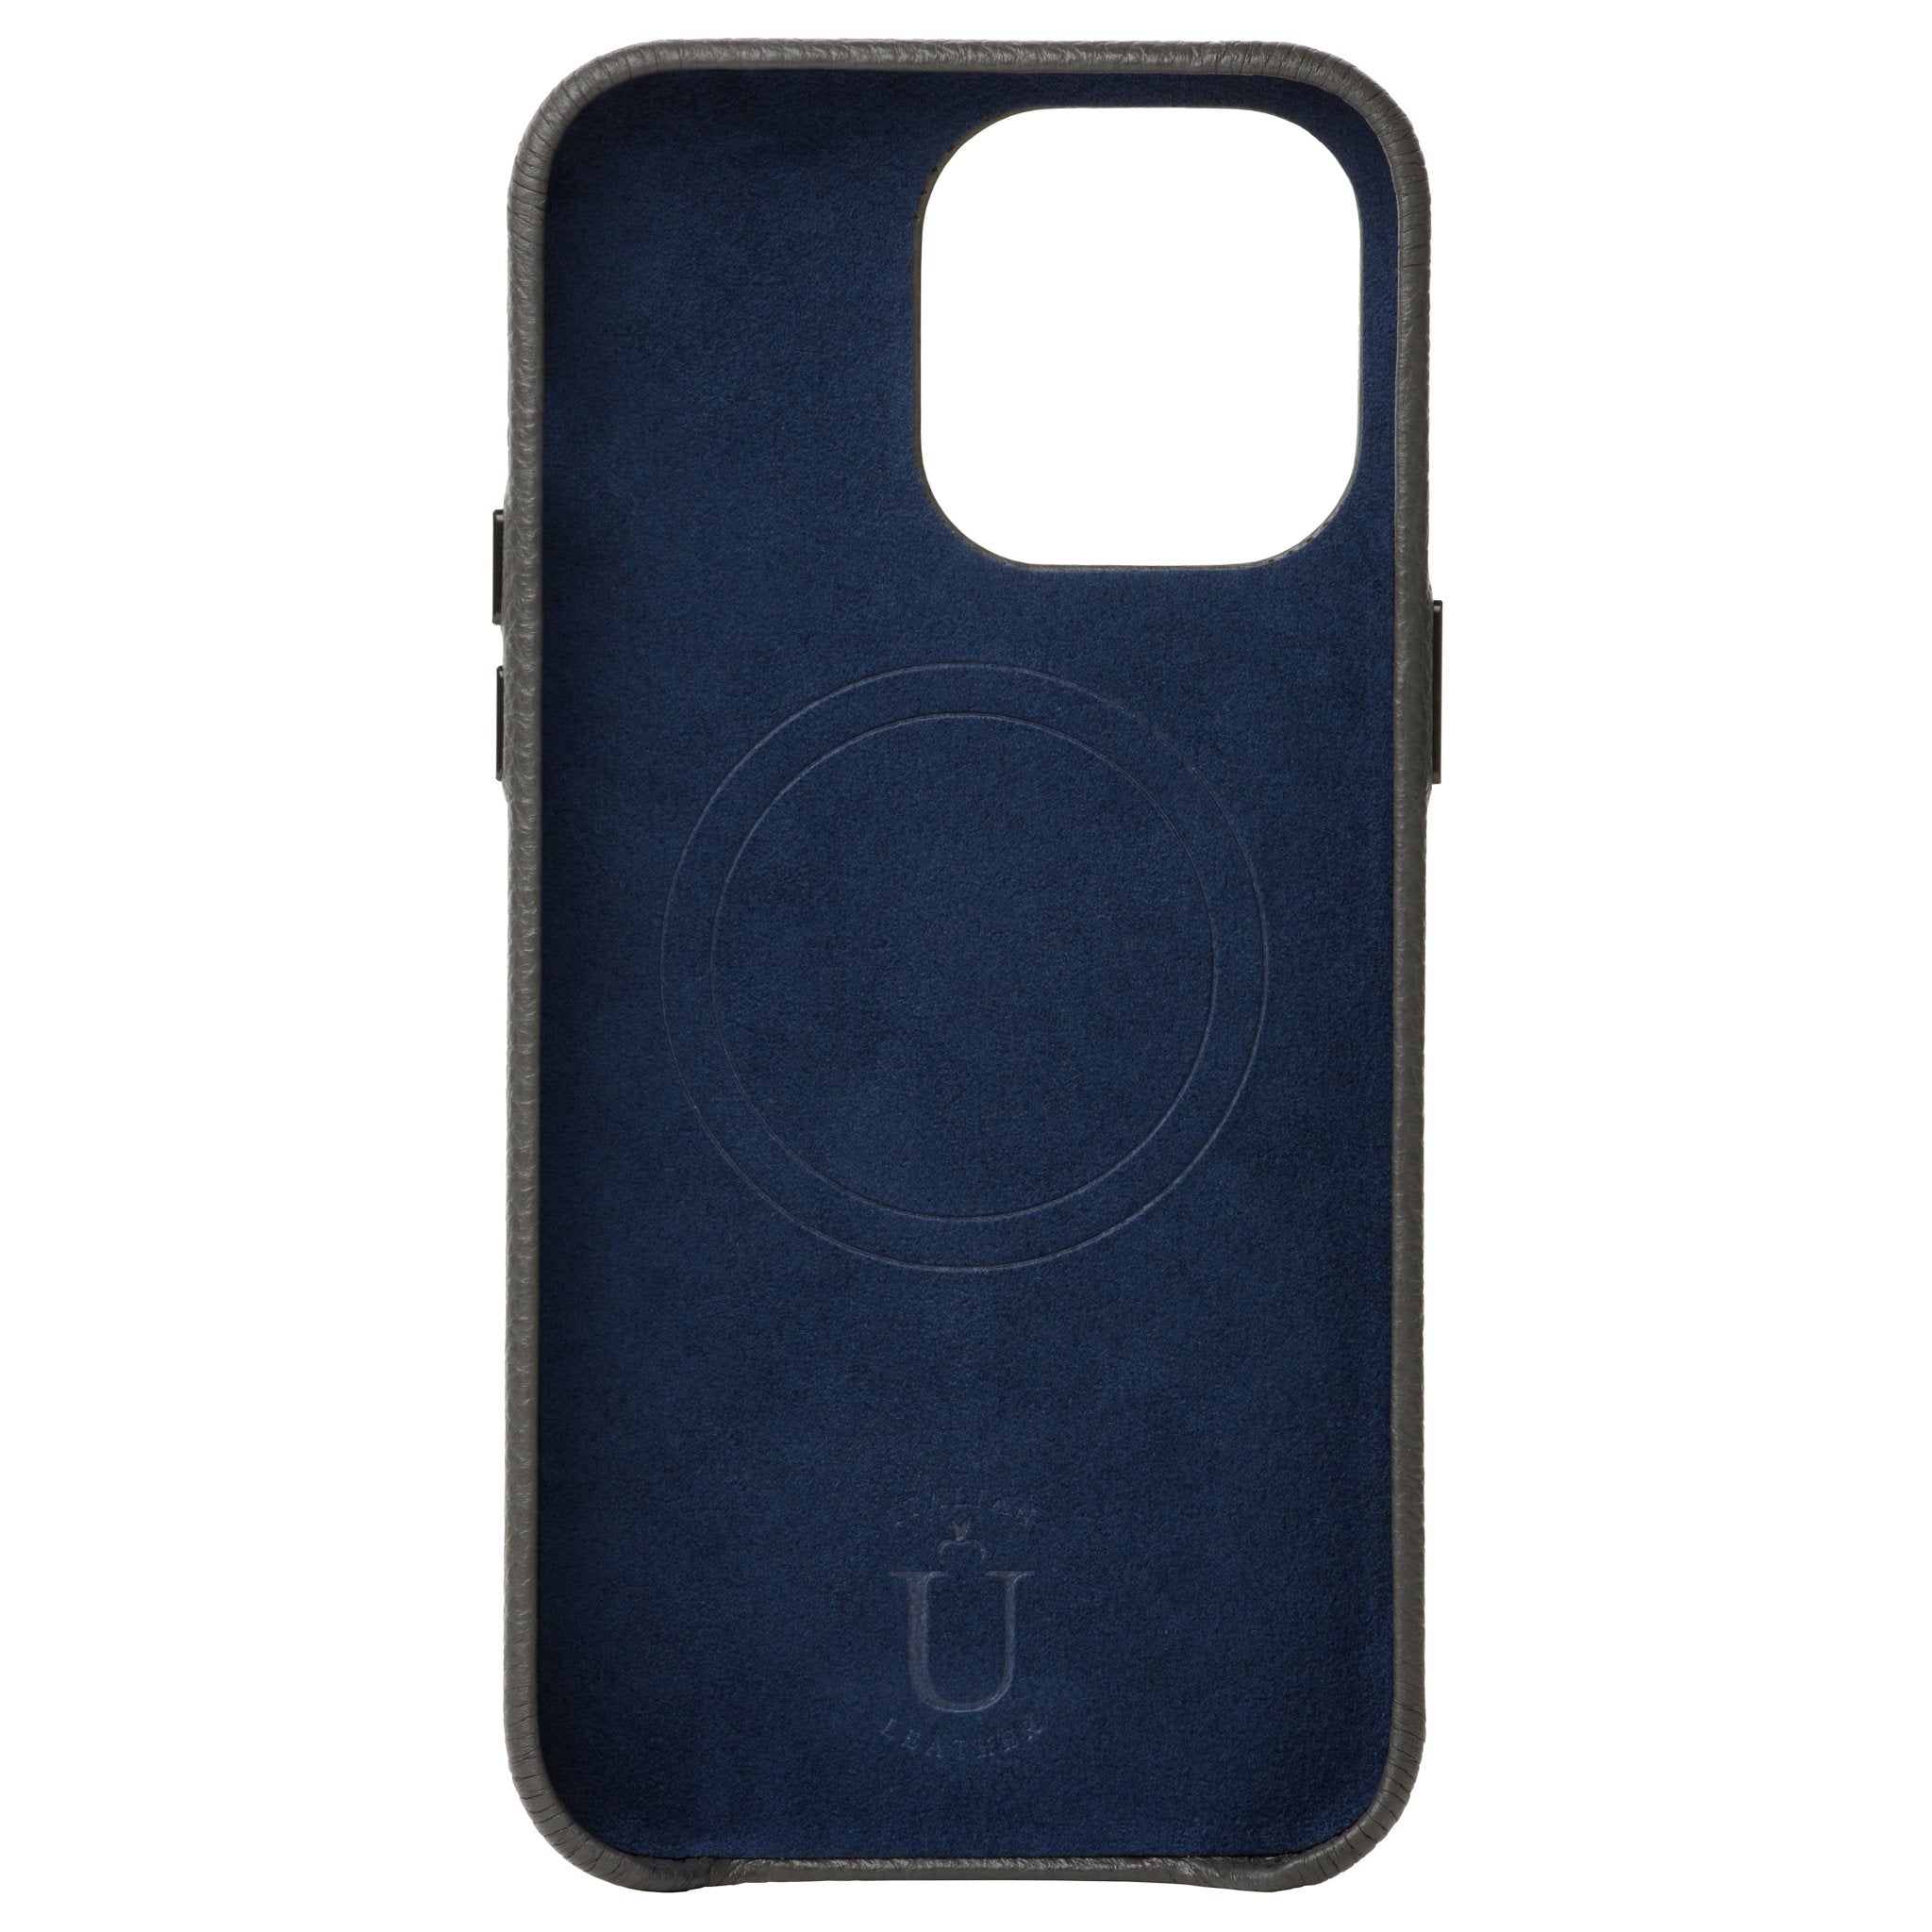 Ubique Italy Luxury iPhone Case 14 Pro Max Pebble Grain Leather Storm Grey Inner Lining